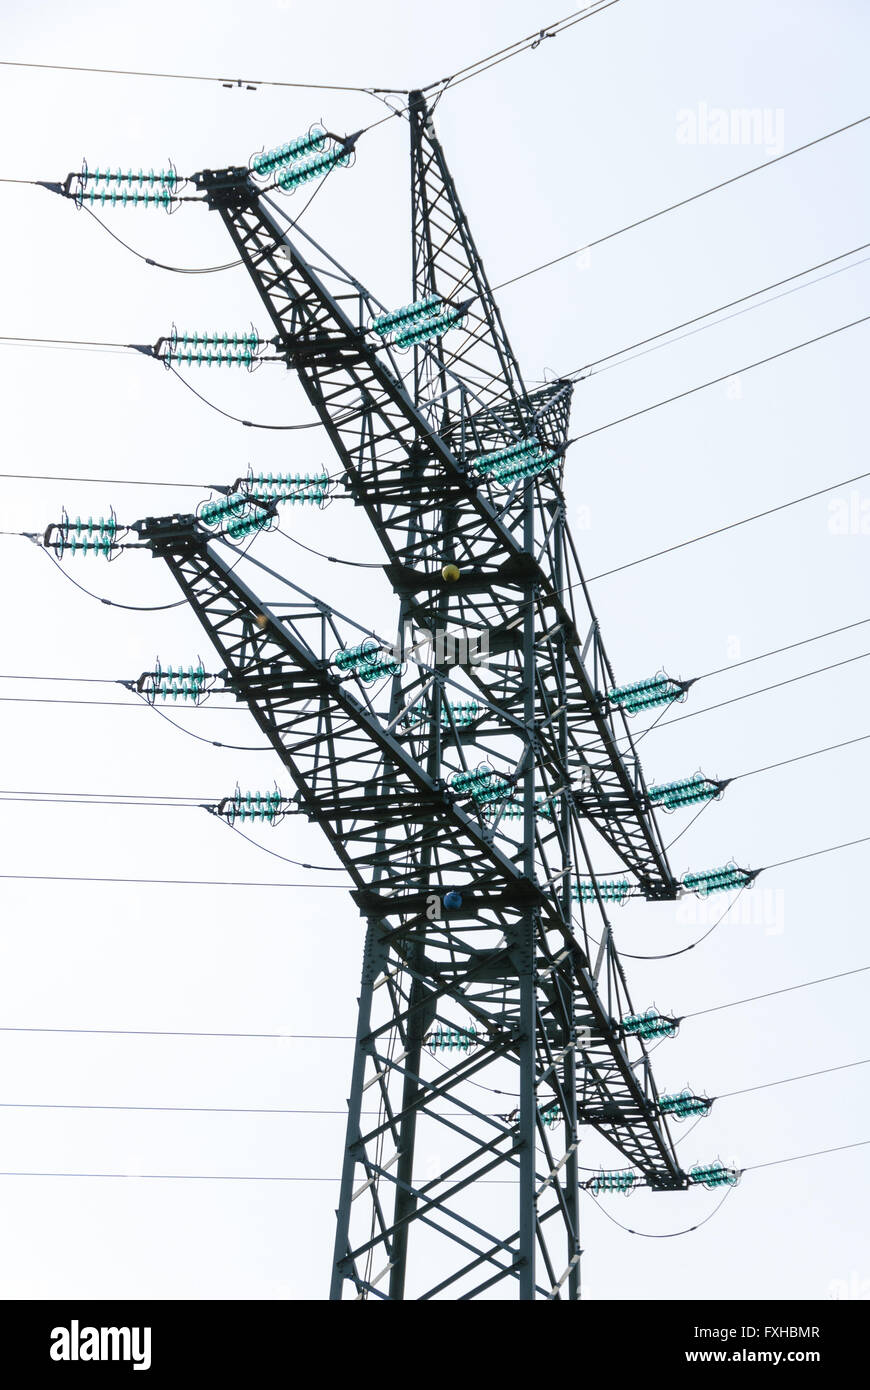 Tension tower with traverses of a high-voltage line Stock Photo